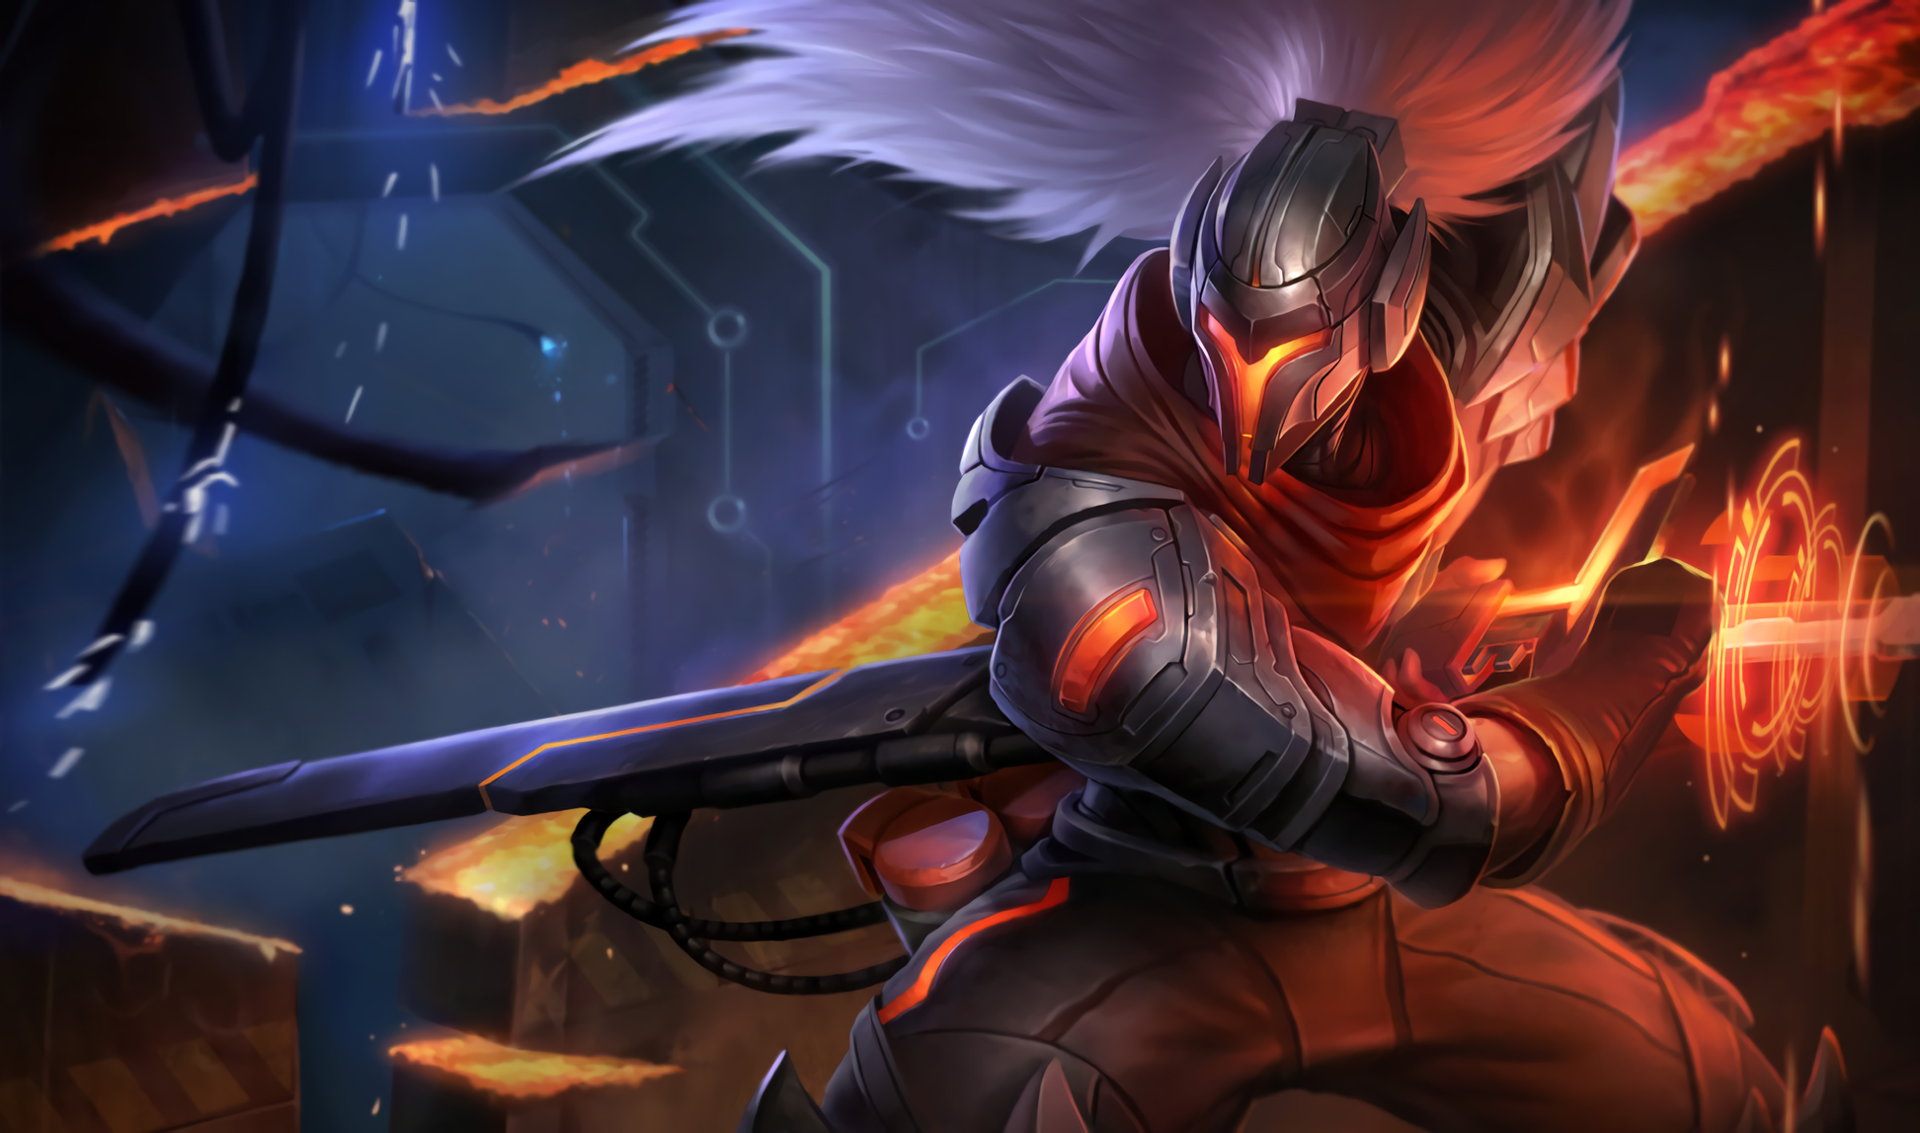 Project Yasuo HD Wallpaper Background Image